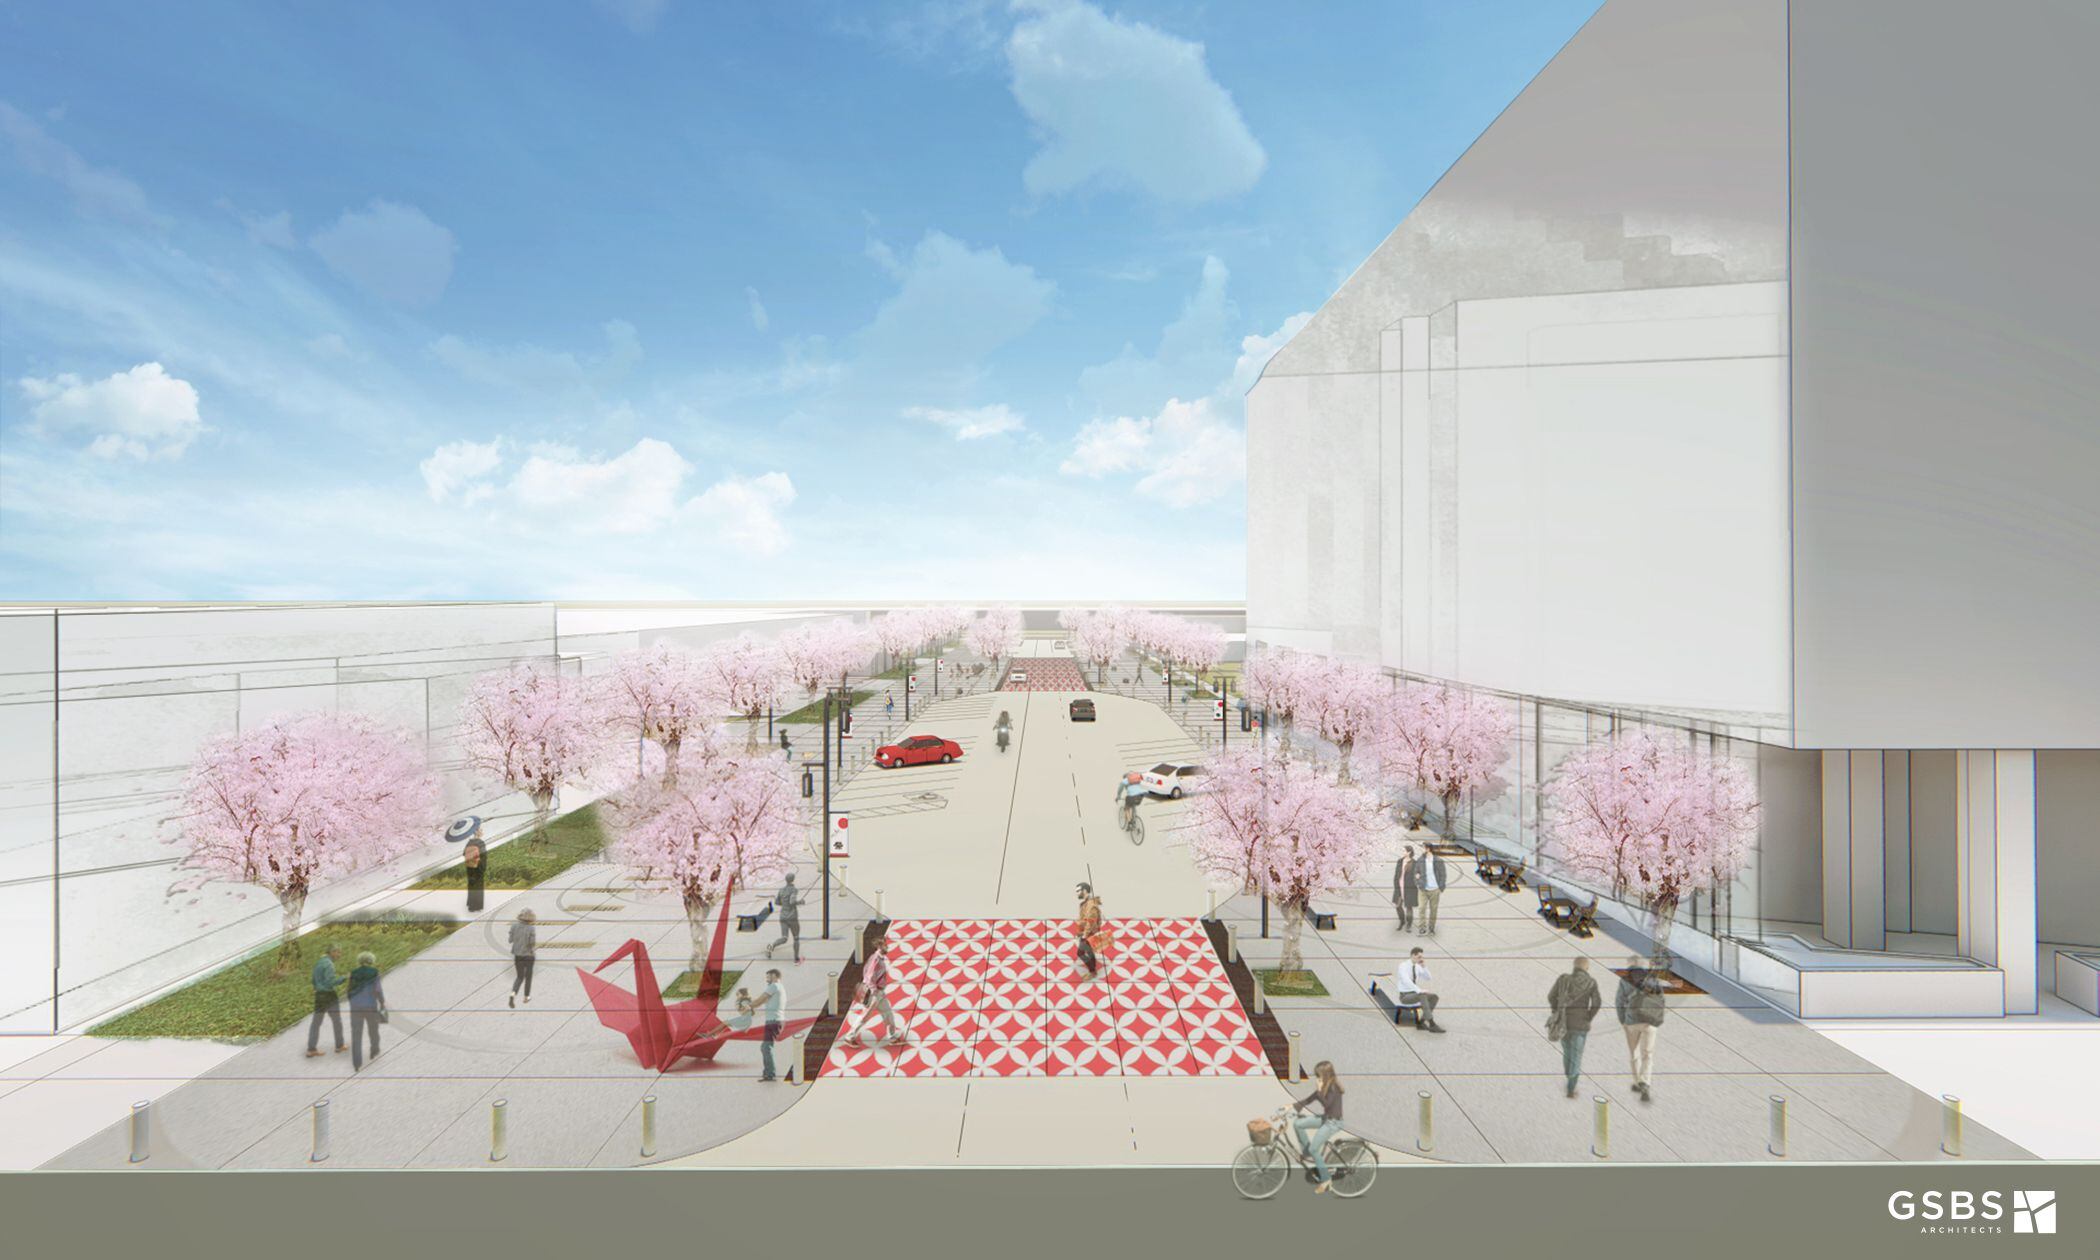 (GSBS Architects) Rendering of draft street designs and place-making elements proposed for Japantown in Salt Lake City. The one-block cultural hub is envisioned along downtown Salt Lake City’s 100 South between 200 and 300 West next to the Salt Palace, in honor of what was once a thriving neighborhood for Utah’s Japanese American residents.